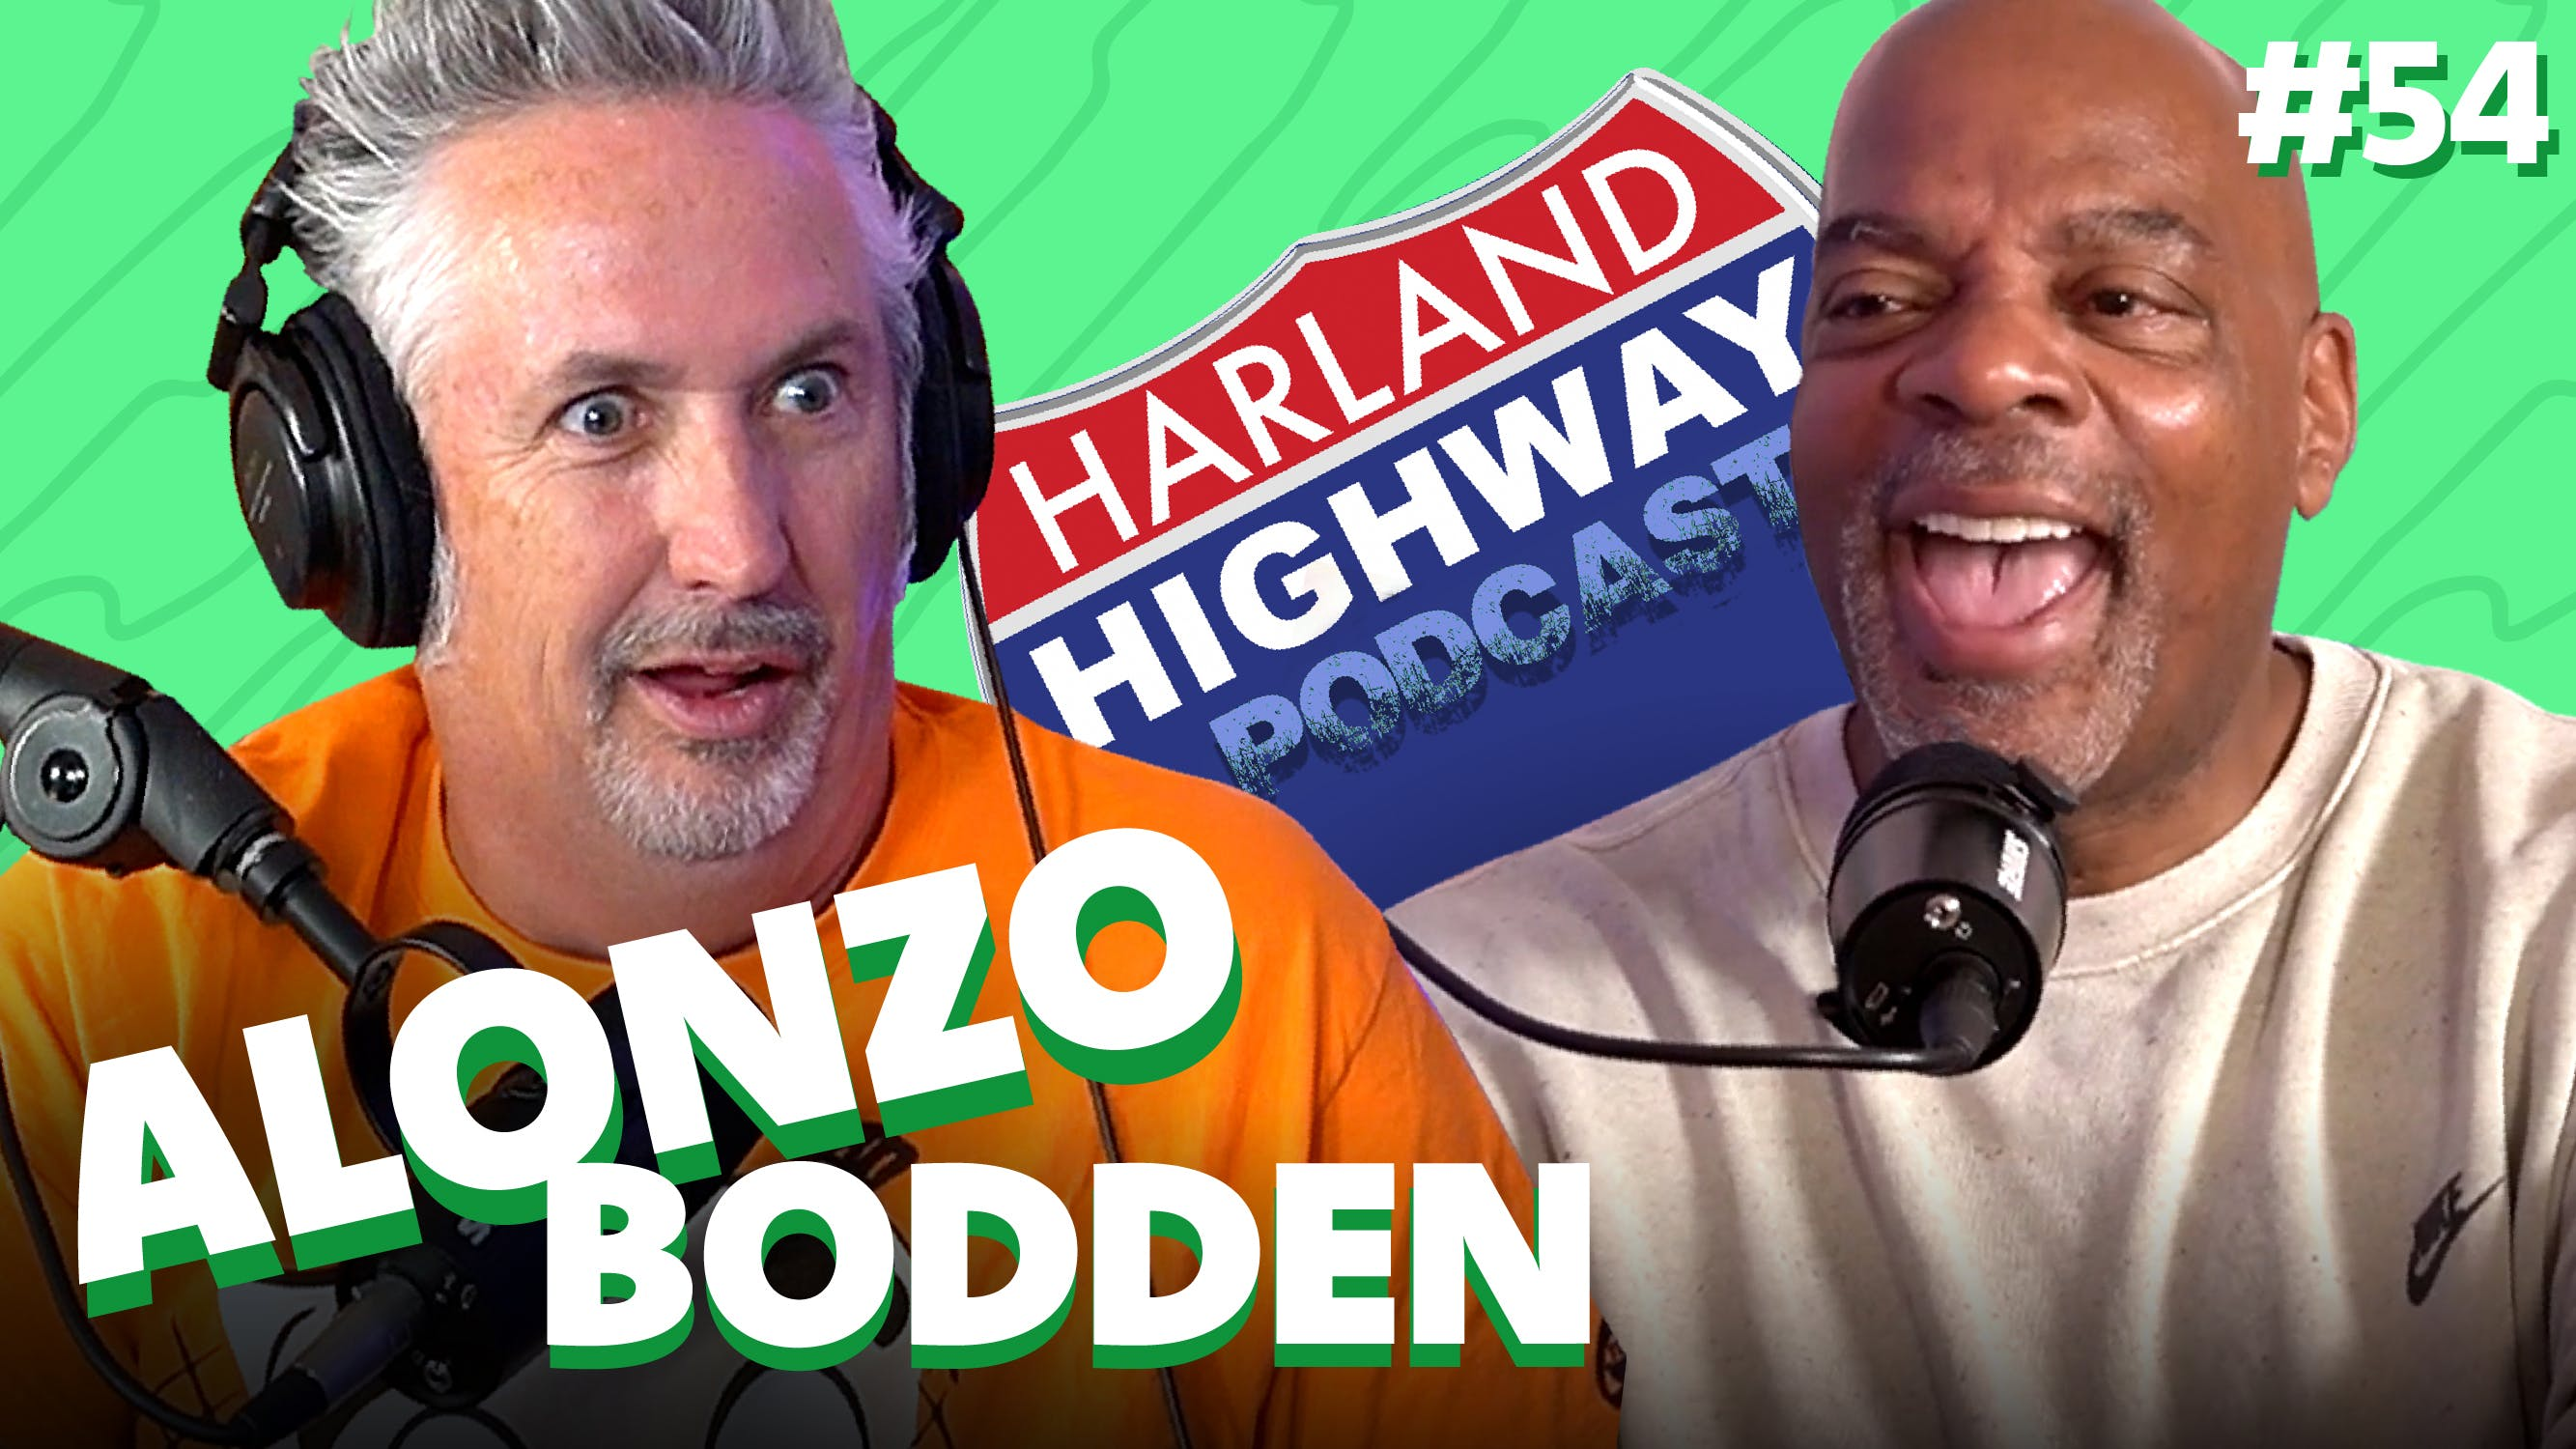 NEW HARLAND HIGHWAY #54 - ALONZO BODDEN, Comedian, Actor, Writer, Motorcycle buff.